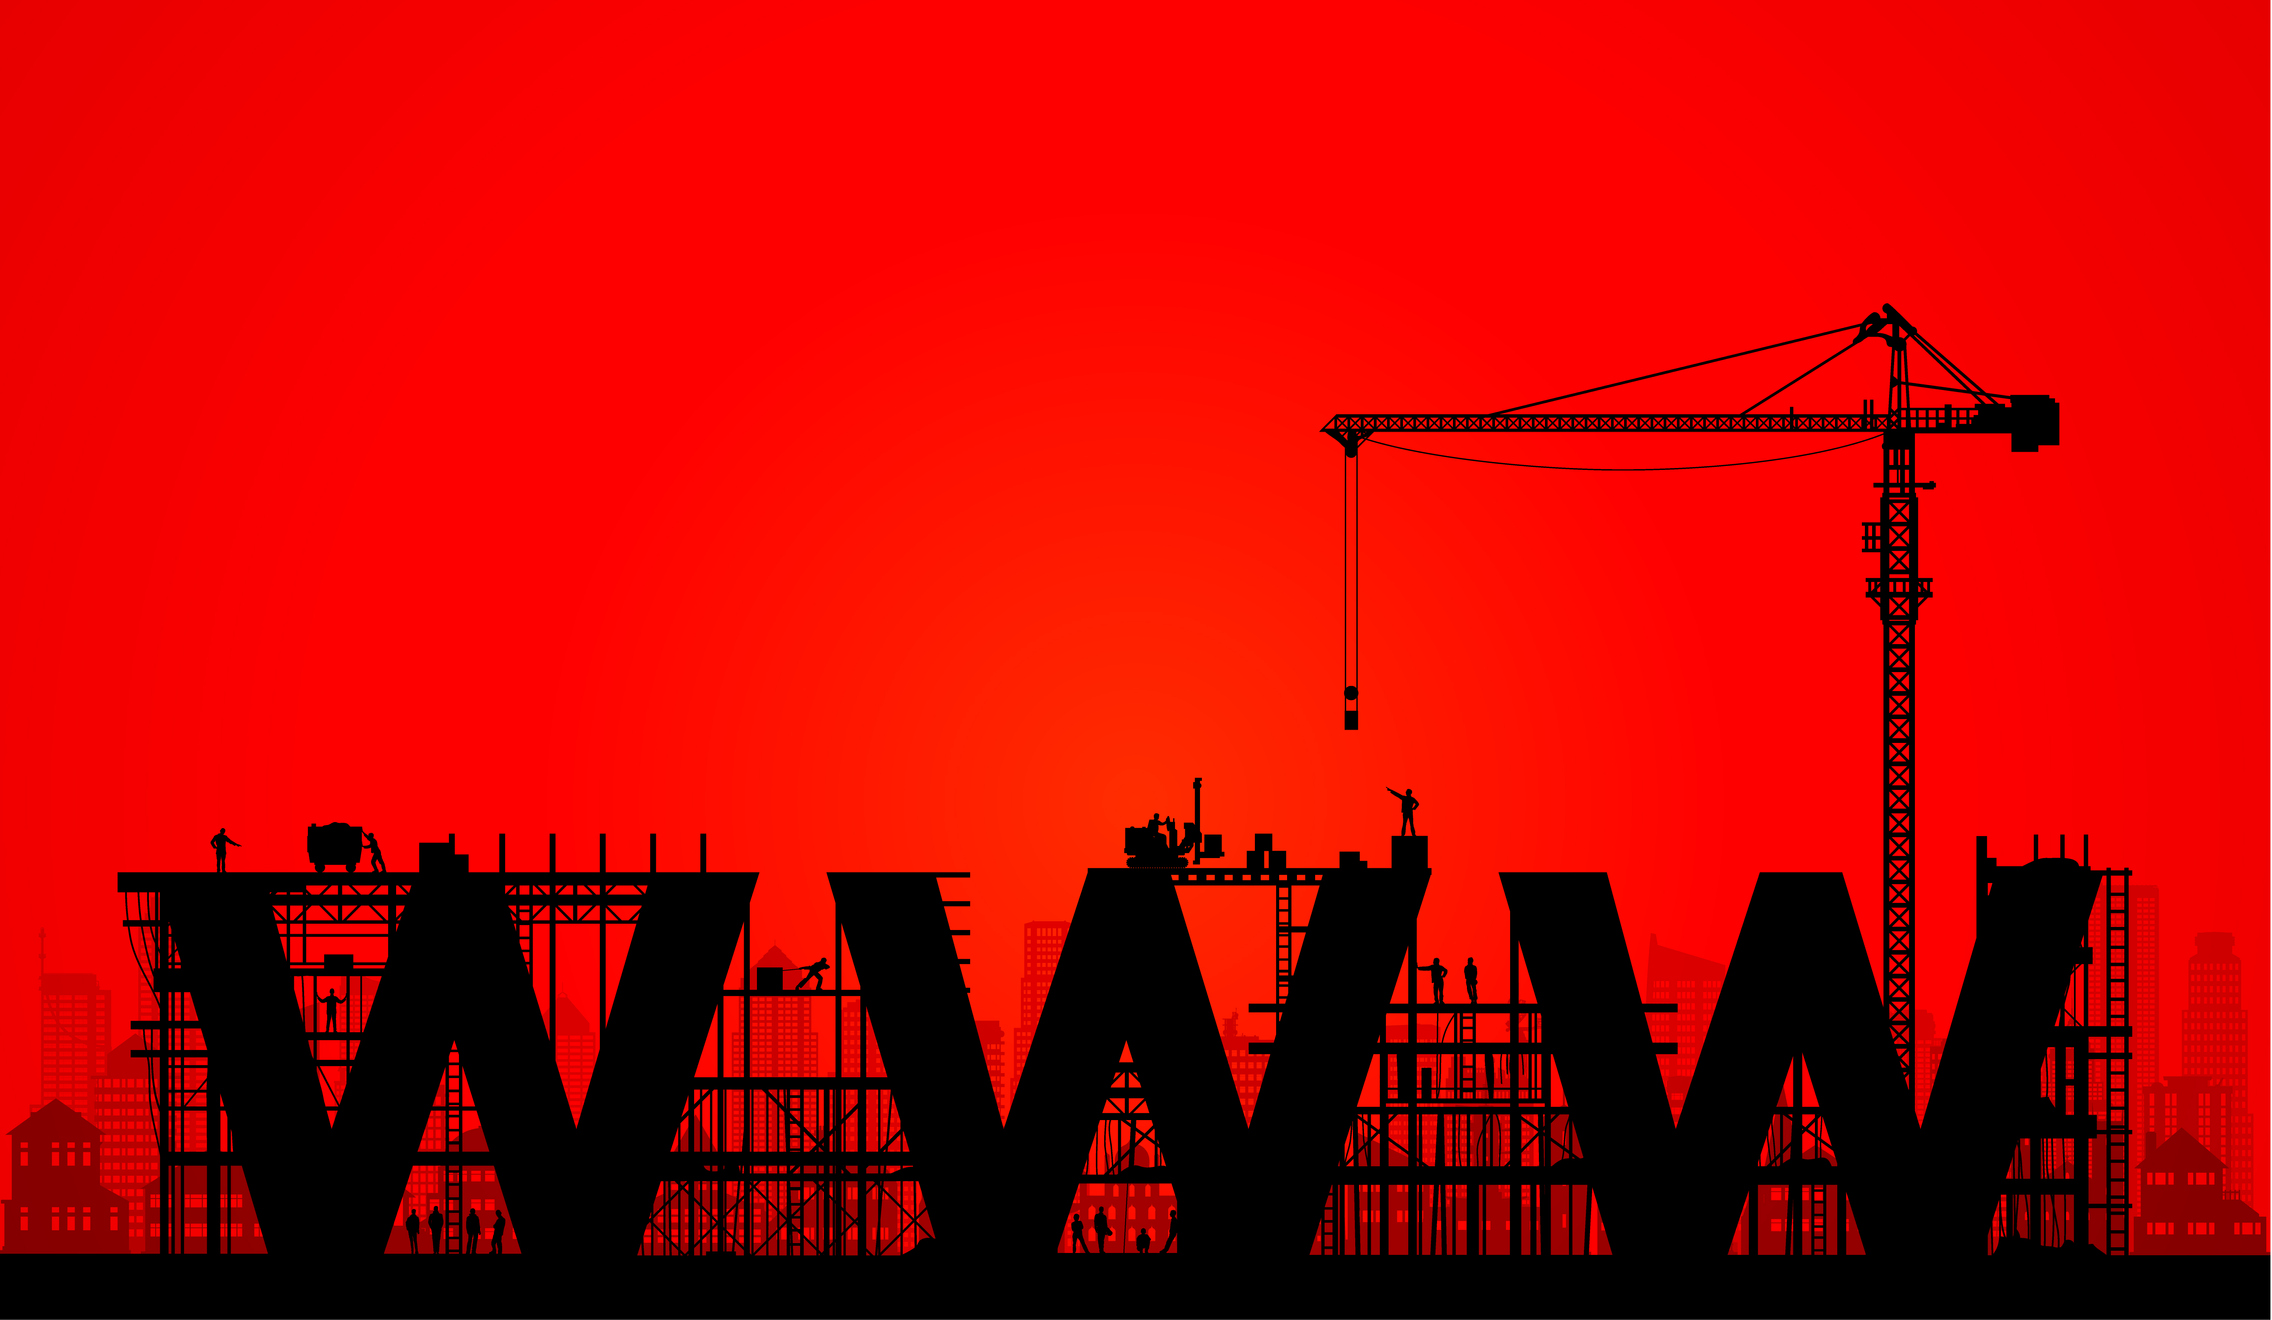 Decorative: Orange background with three black Ws "WWW" illustrated like they are buildings under construction. Representing the three w's that are normally before a website address.